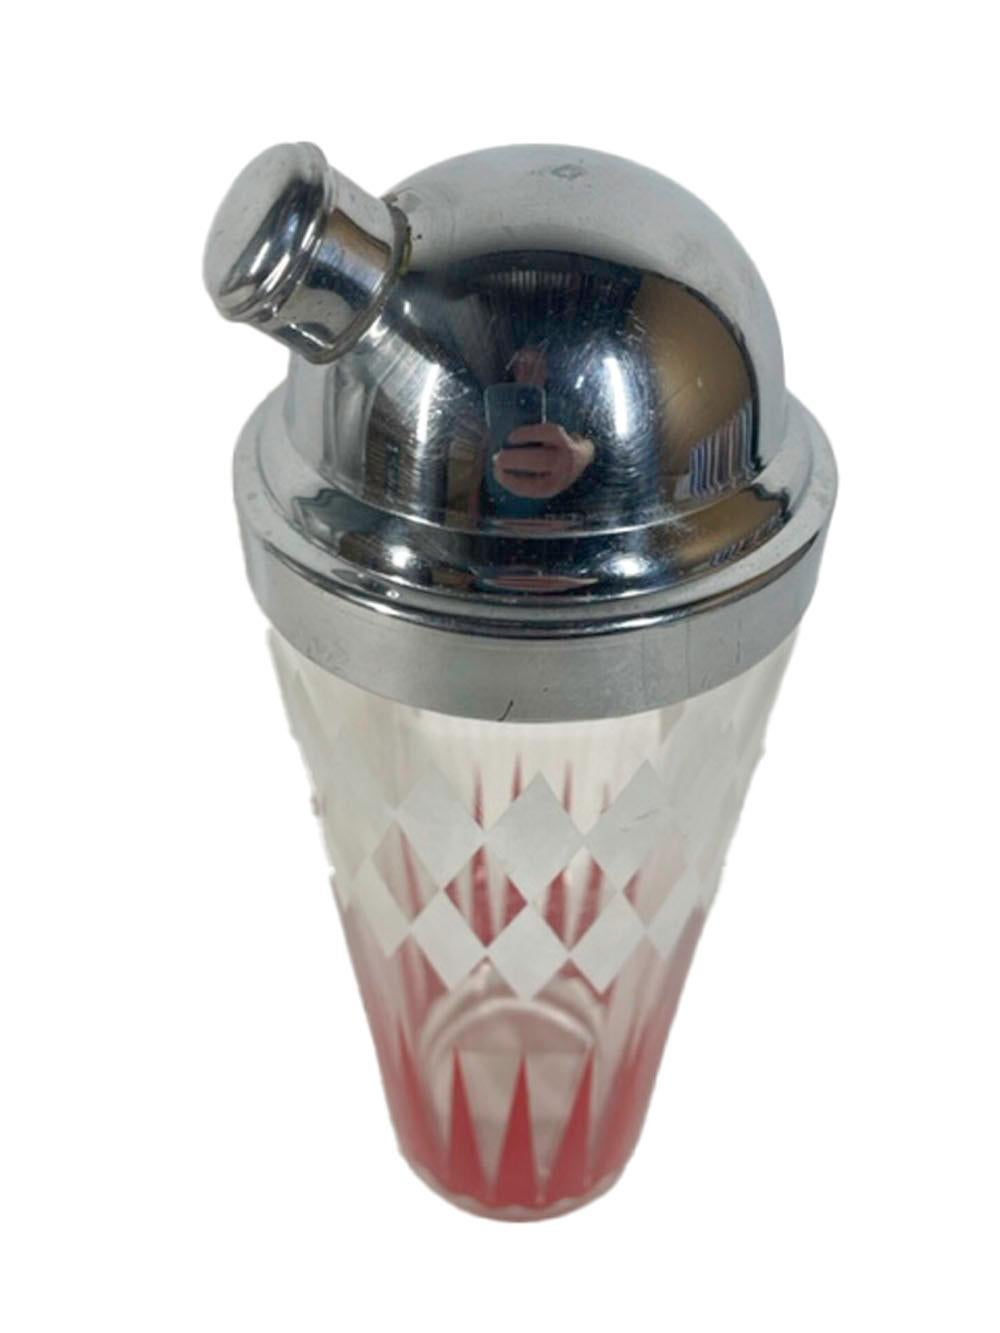 Art Deco cocktail shaker in clear glass with a domed chrome lid with side pour spout and integral strainer. The clear glass body decorated with a double row of white enamel diamonds above elongated red enamel arrows.